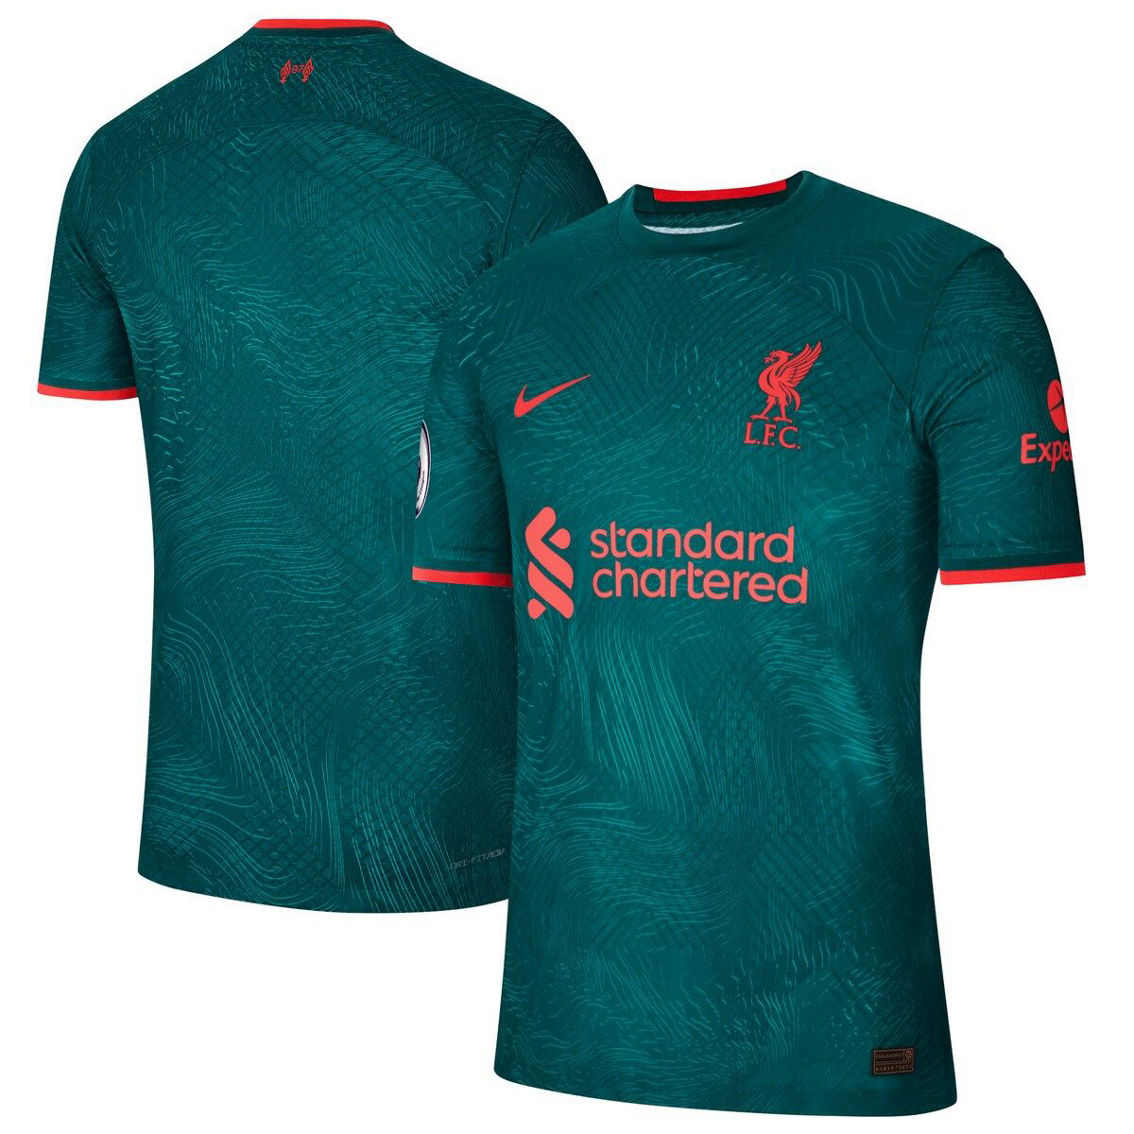 Nike Men's Teal Liverpool 2022/23 Third Authentic Jersey - Image 2 of 4